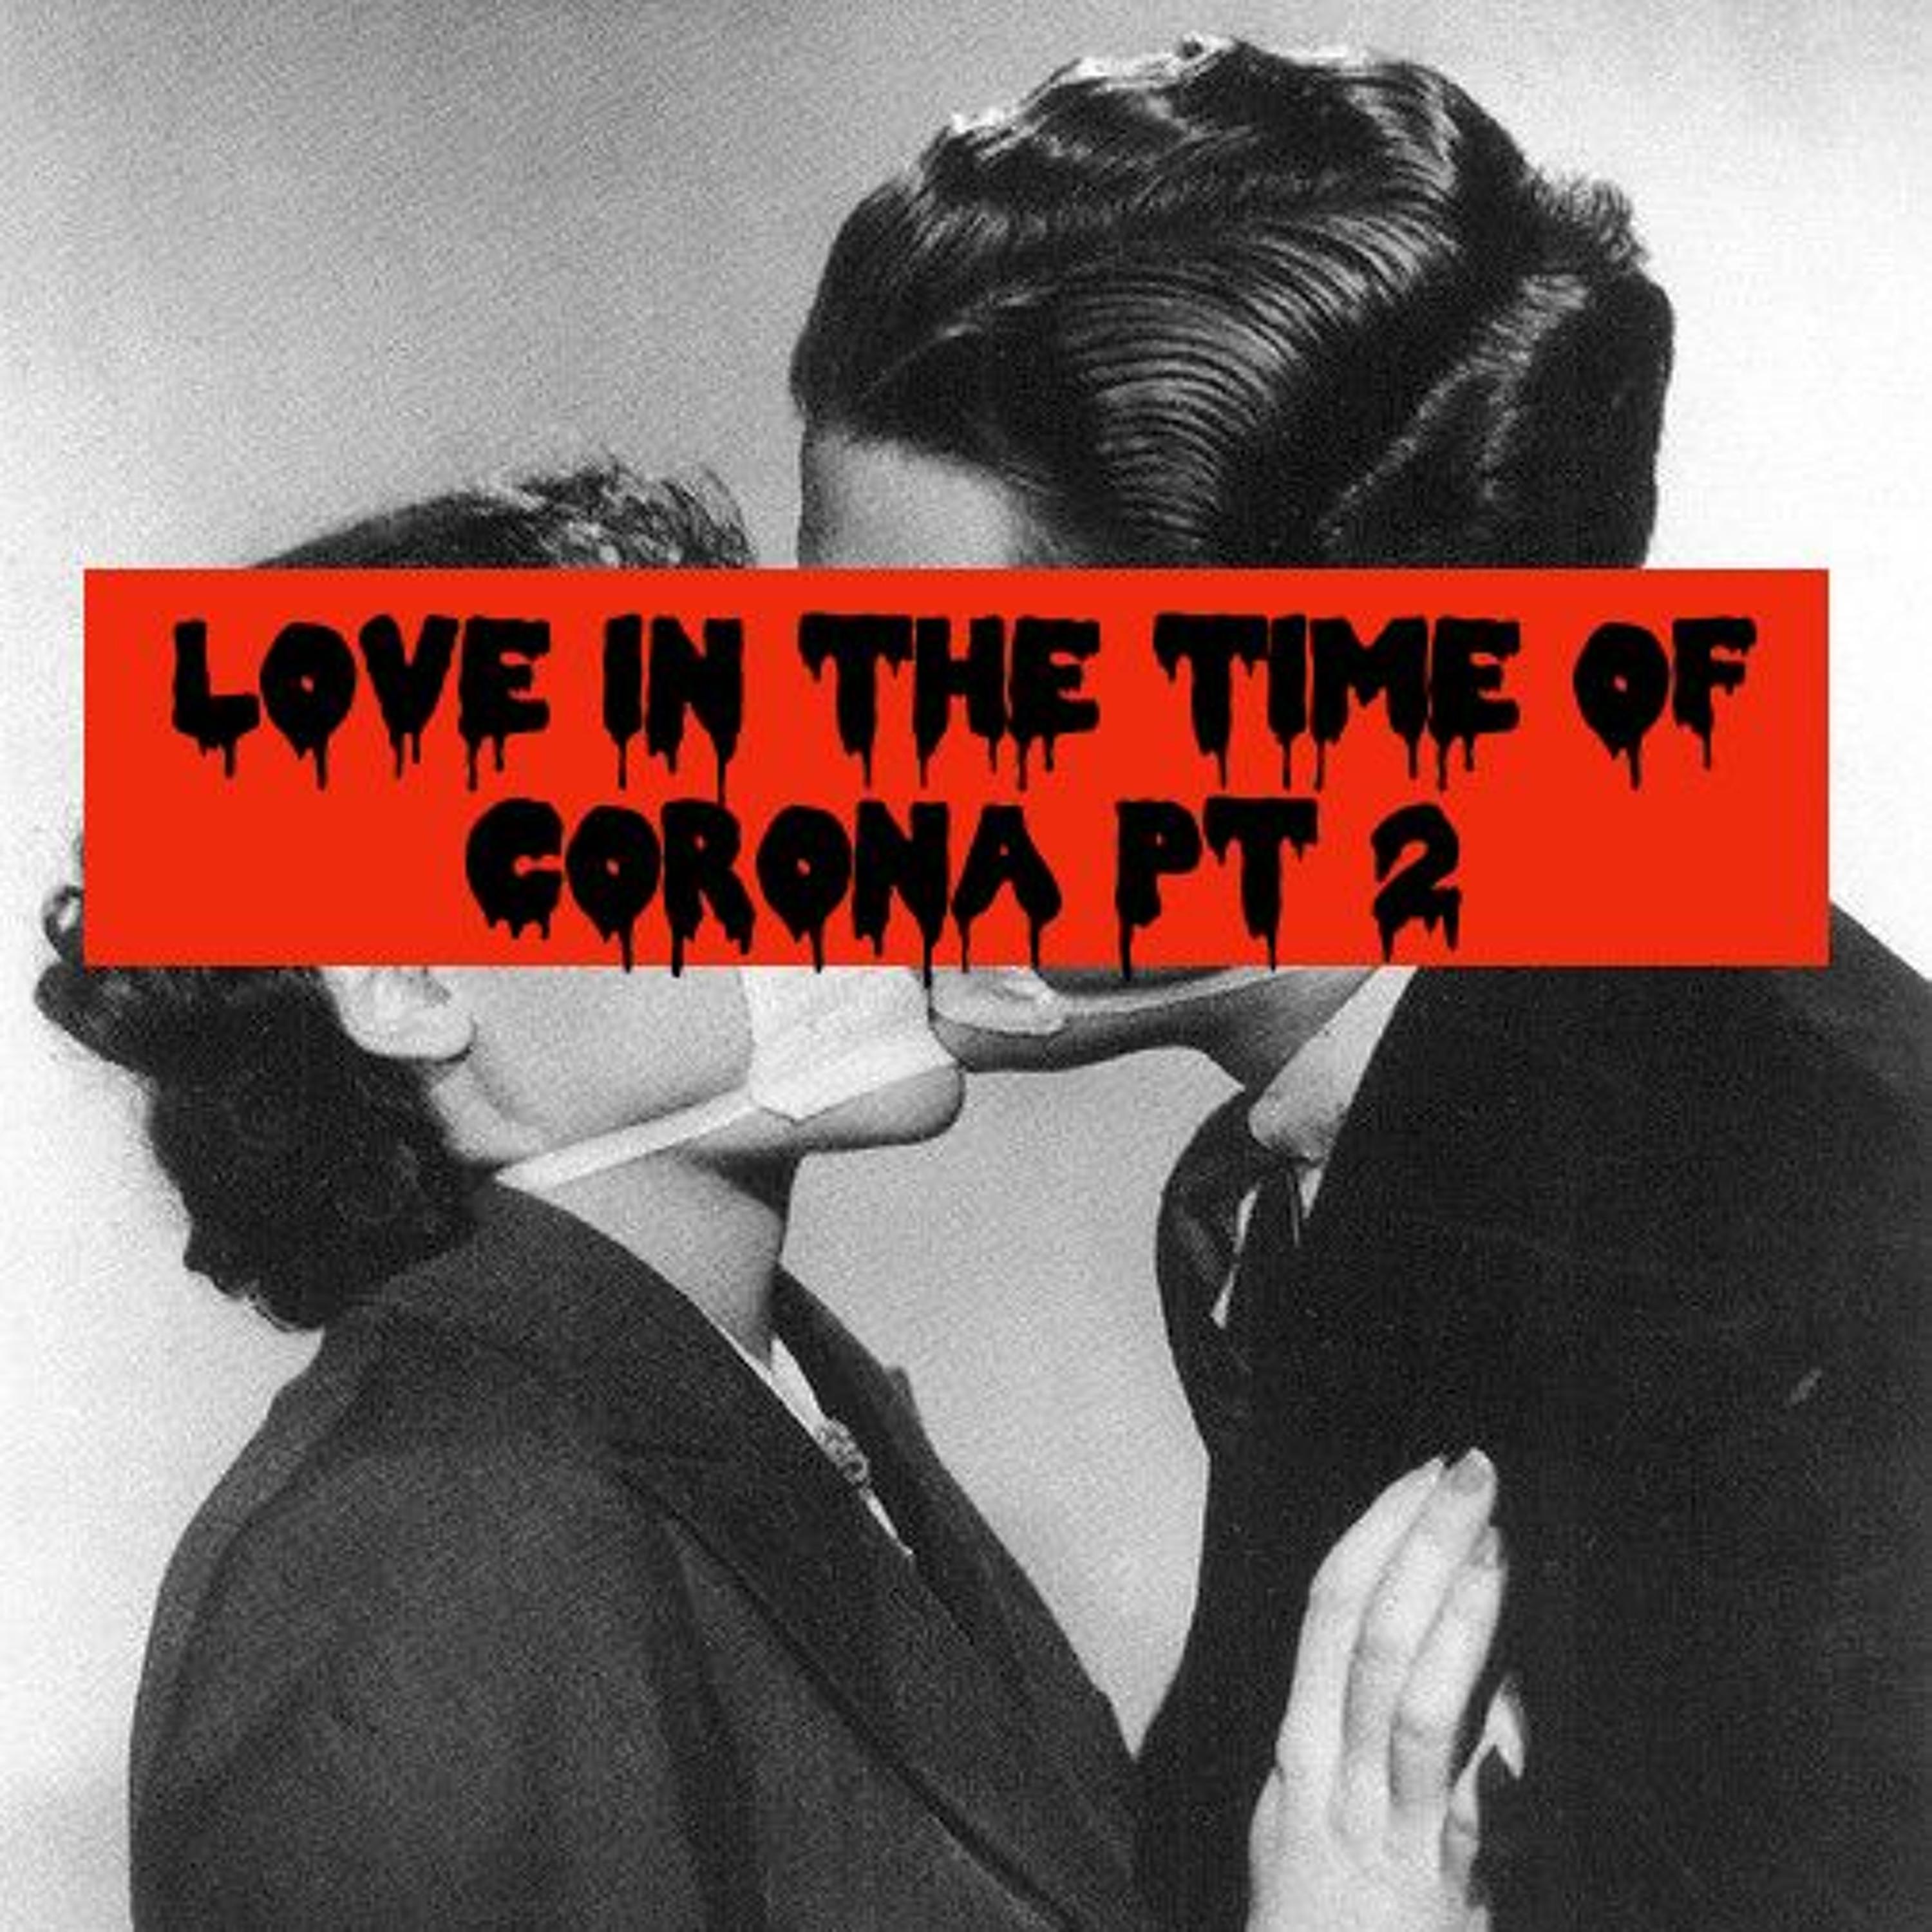 Episode 53: Love in the Time Of Corona Pt. 2